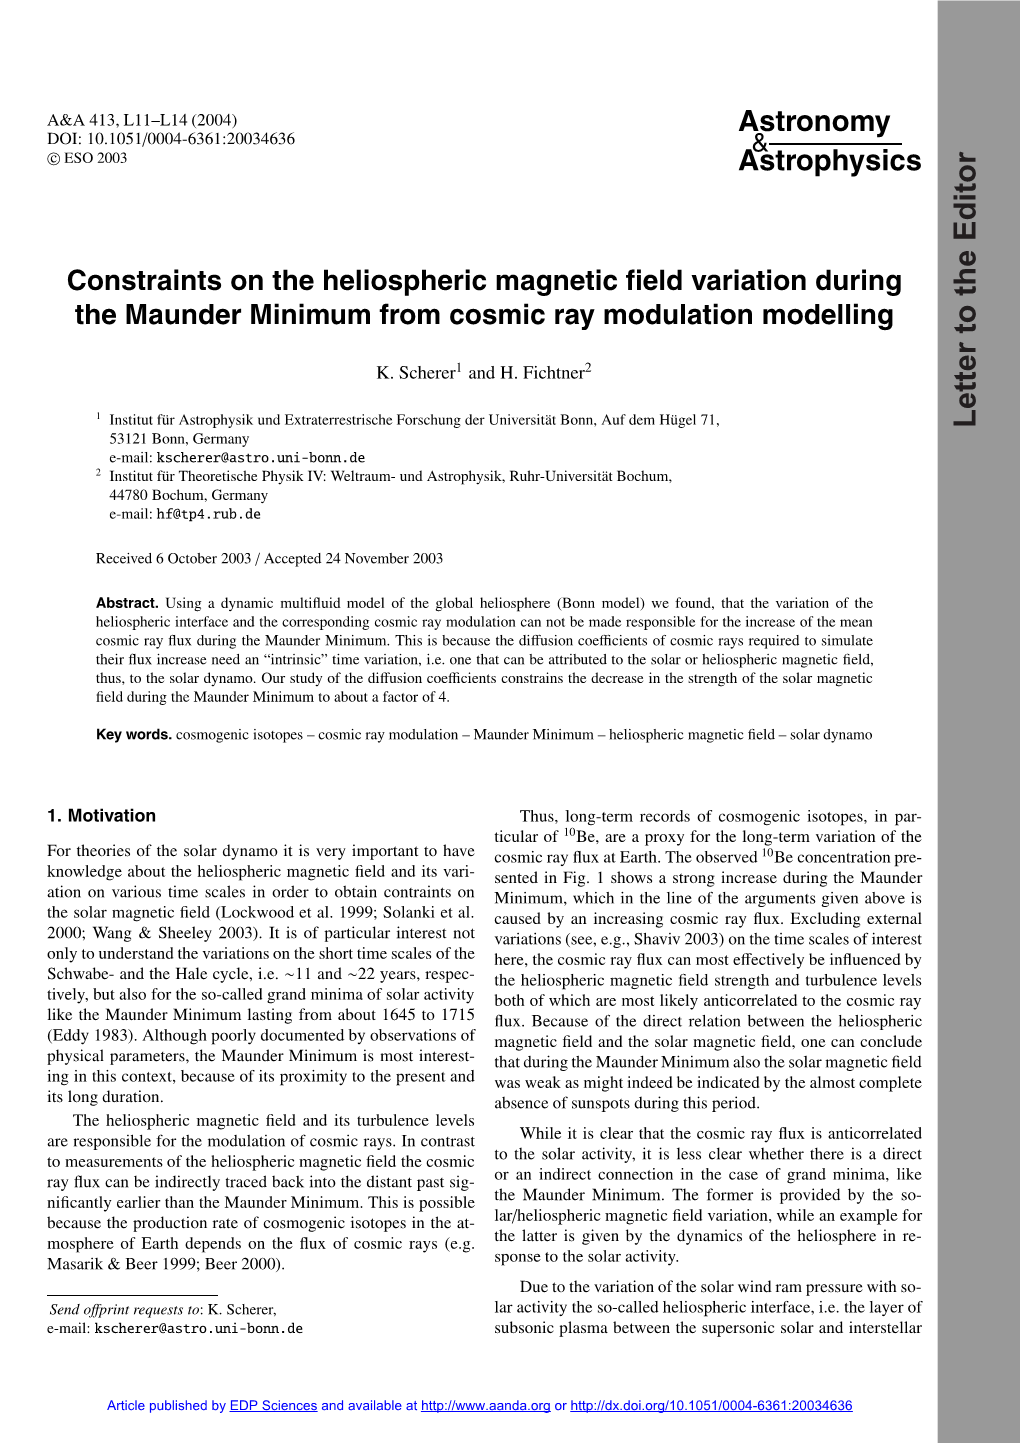 Constraints on the Heliospheric Magnetic Field Variation During The